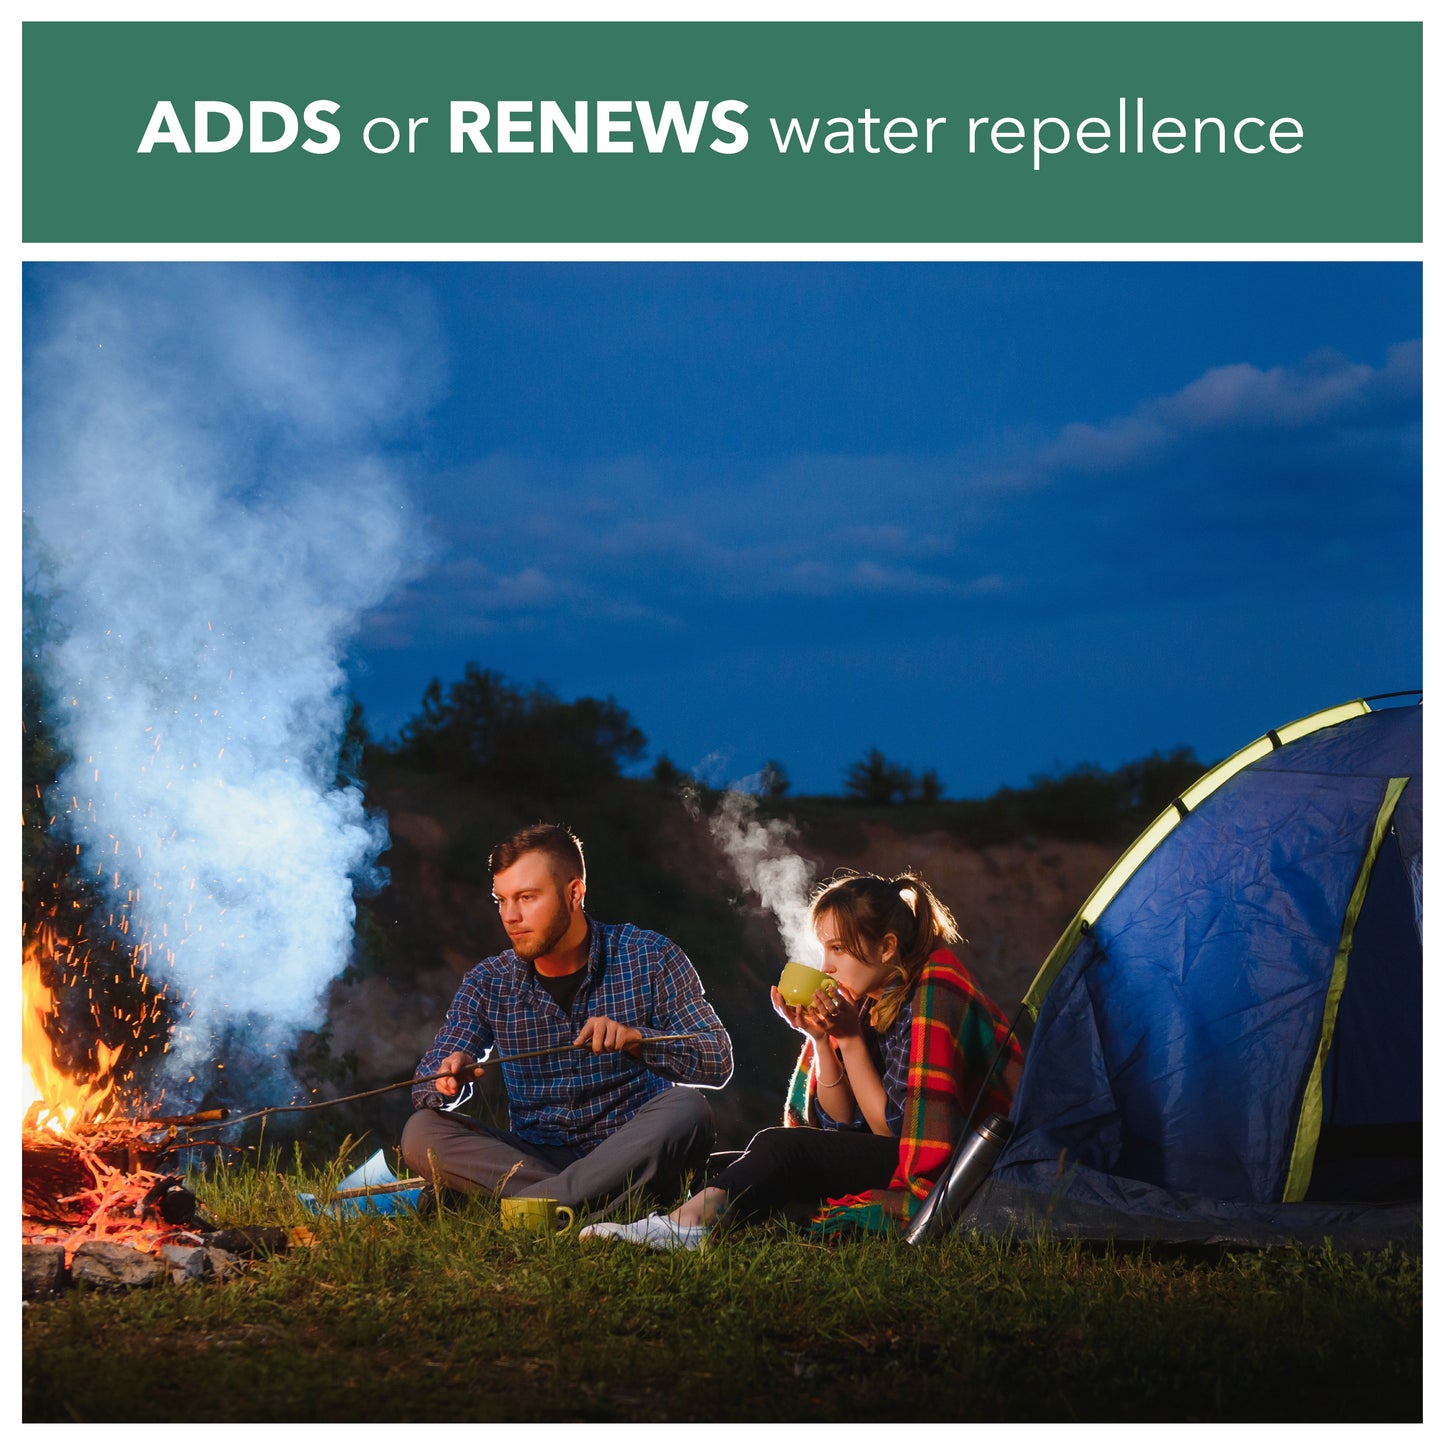 adds or renews water repellence